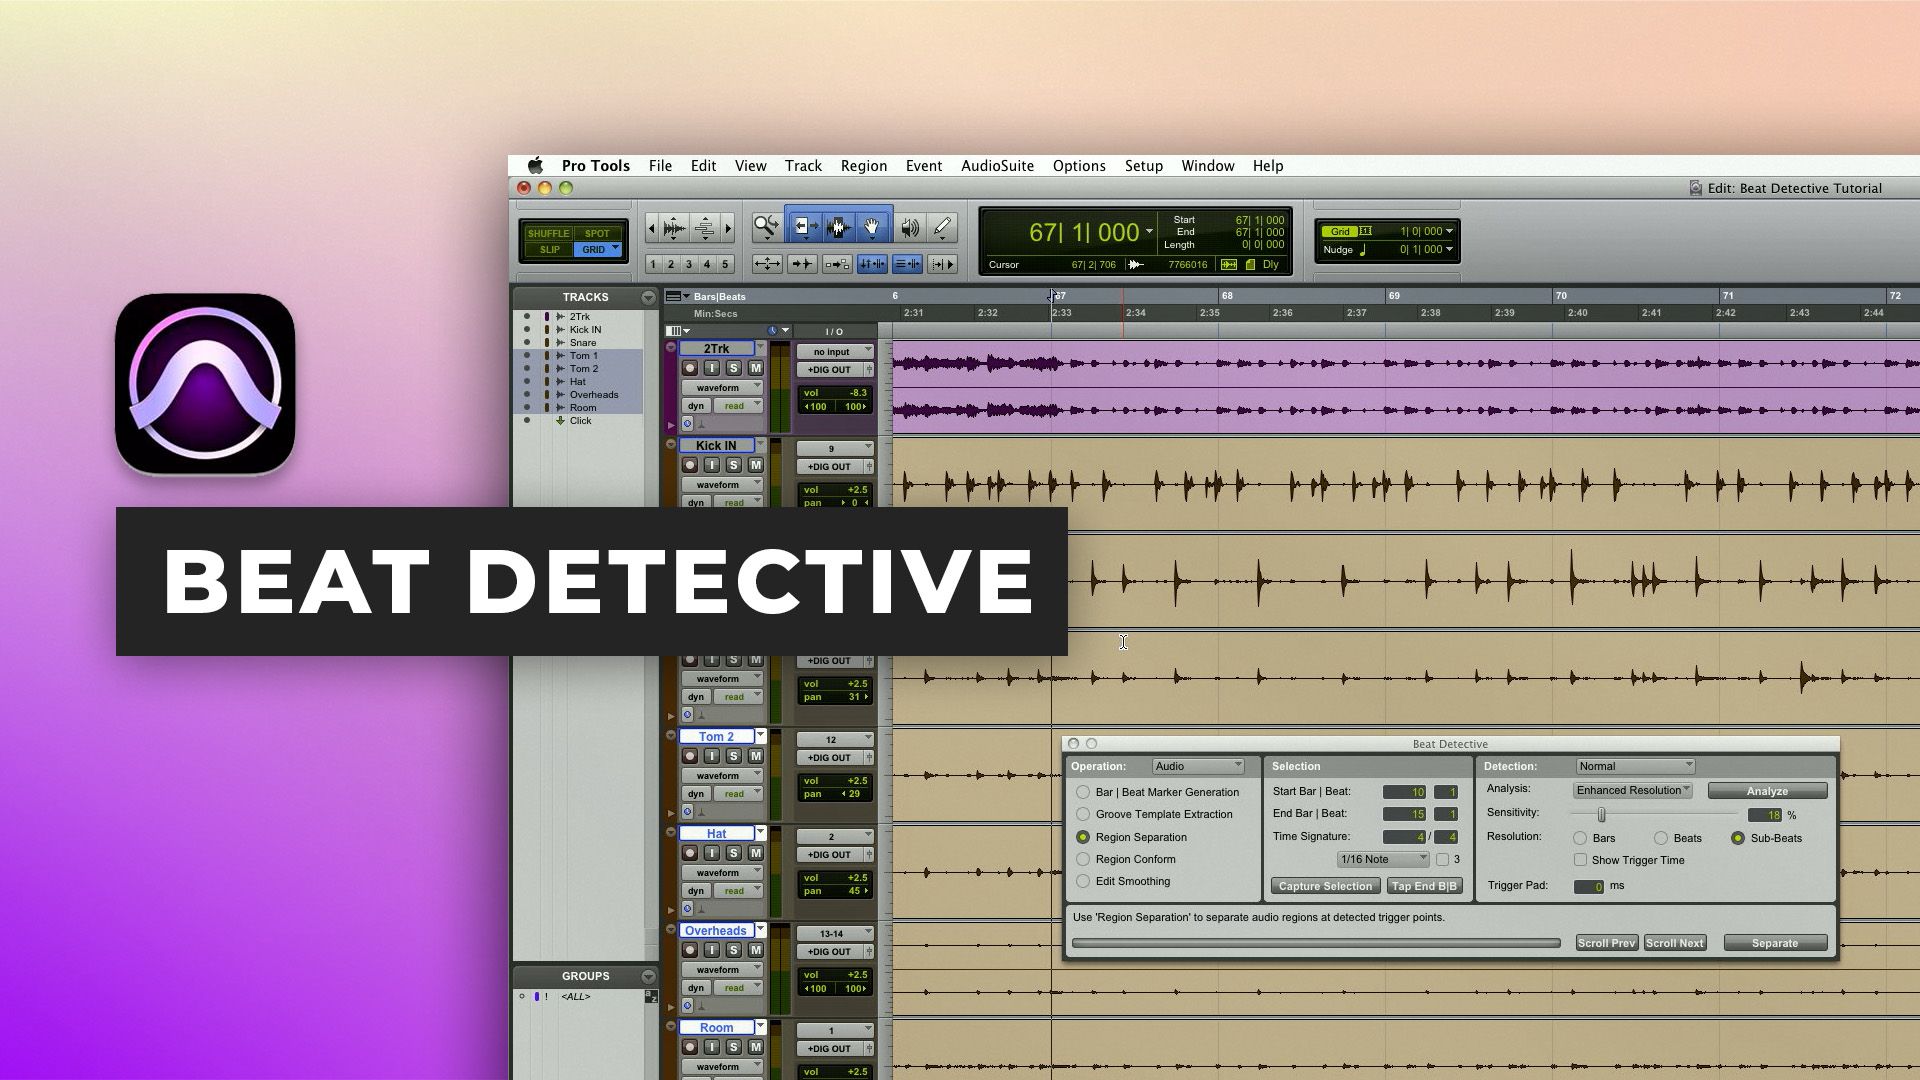 Beat detective in Pro Tools